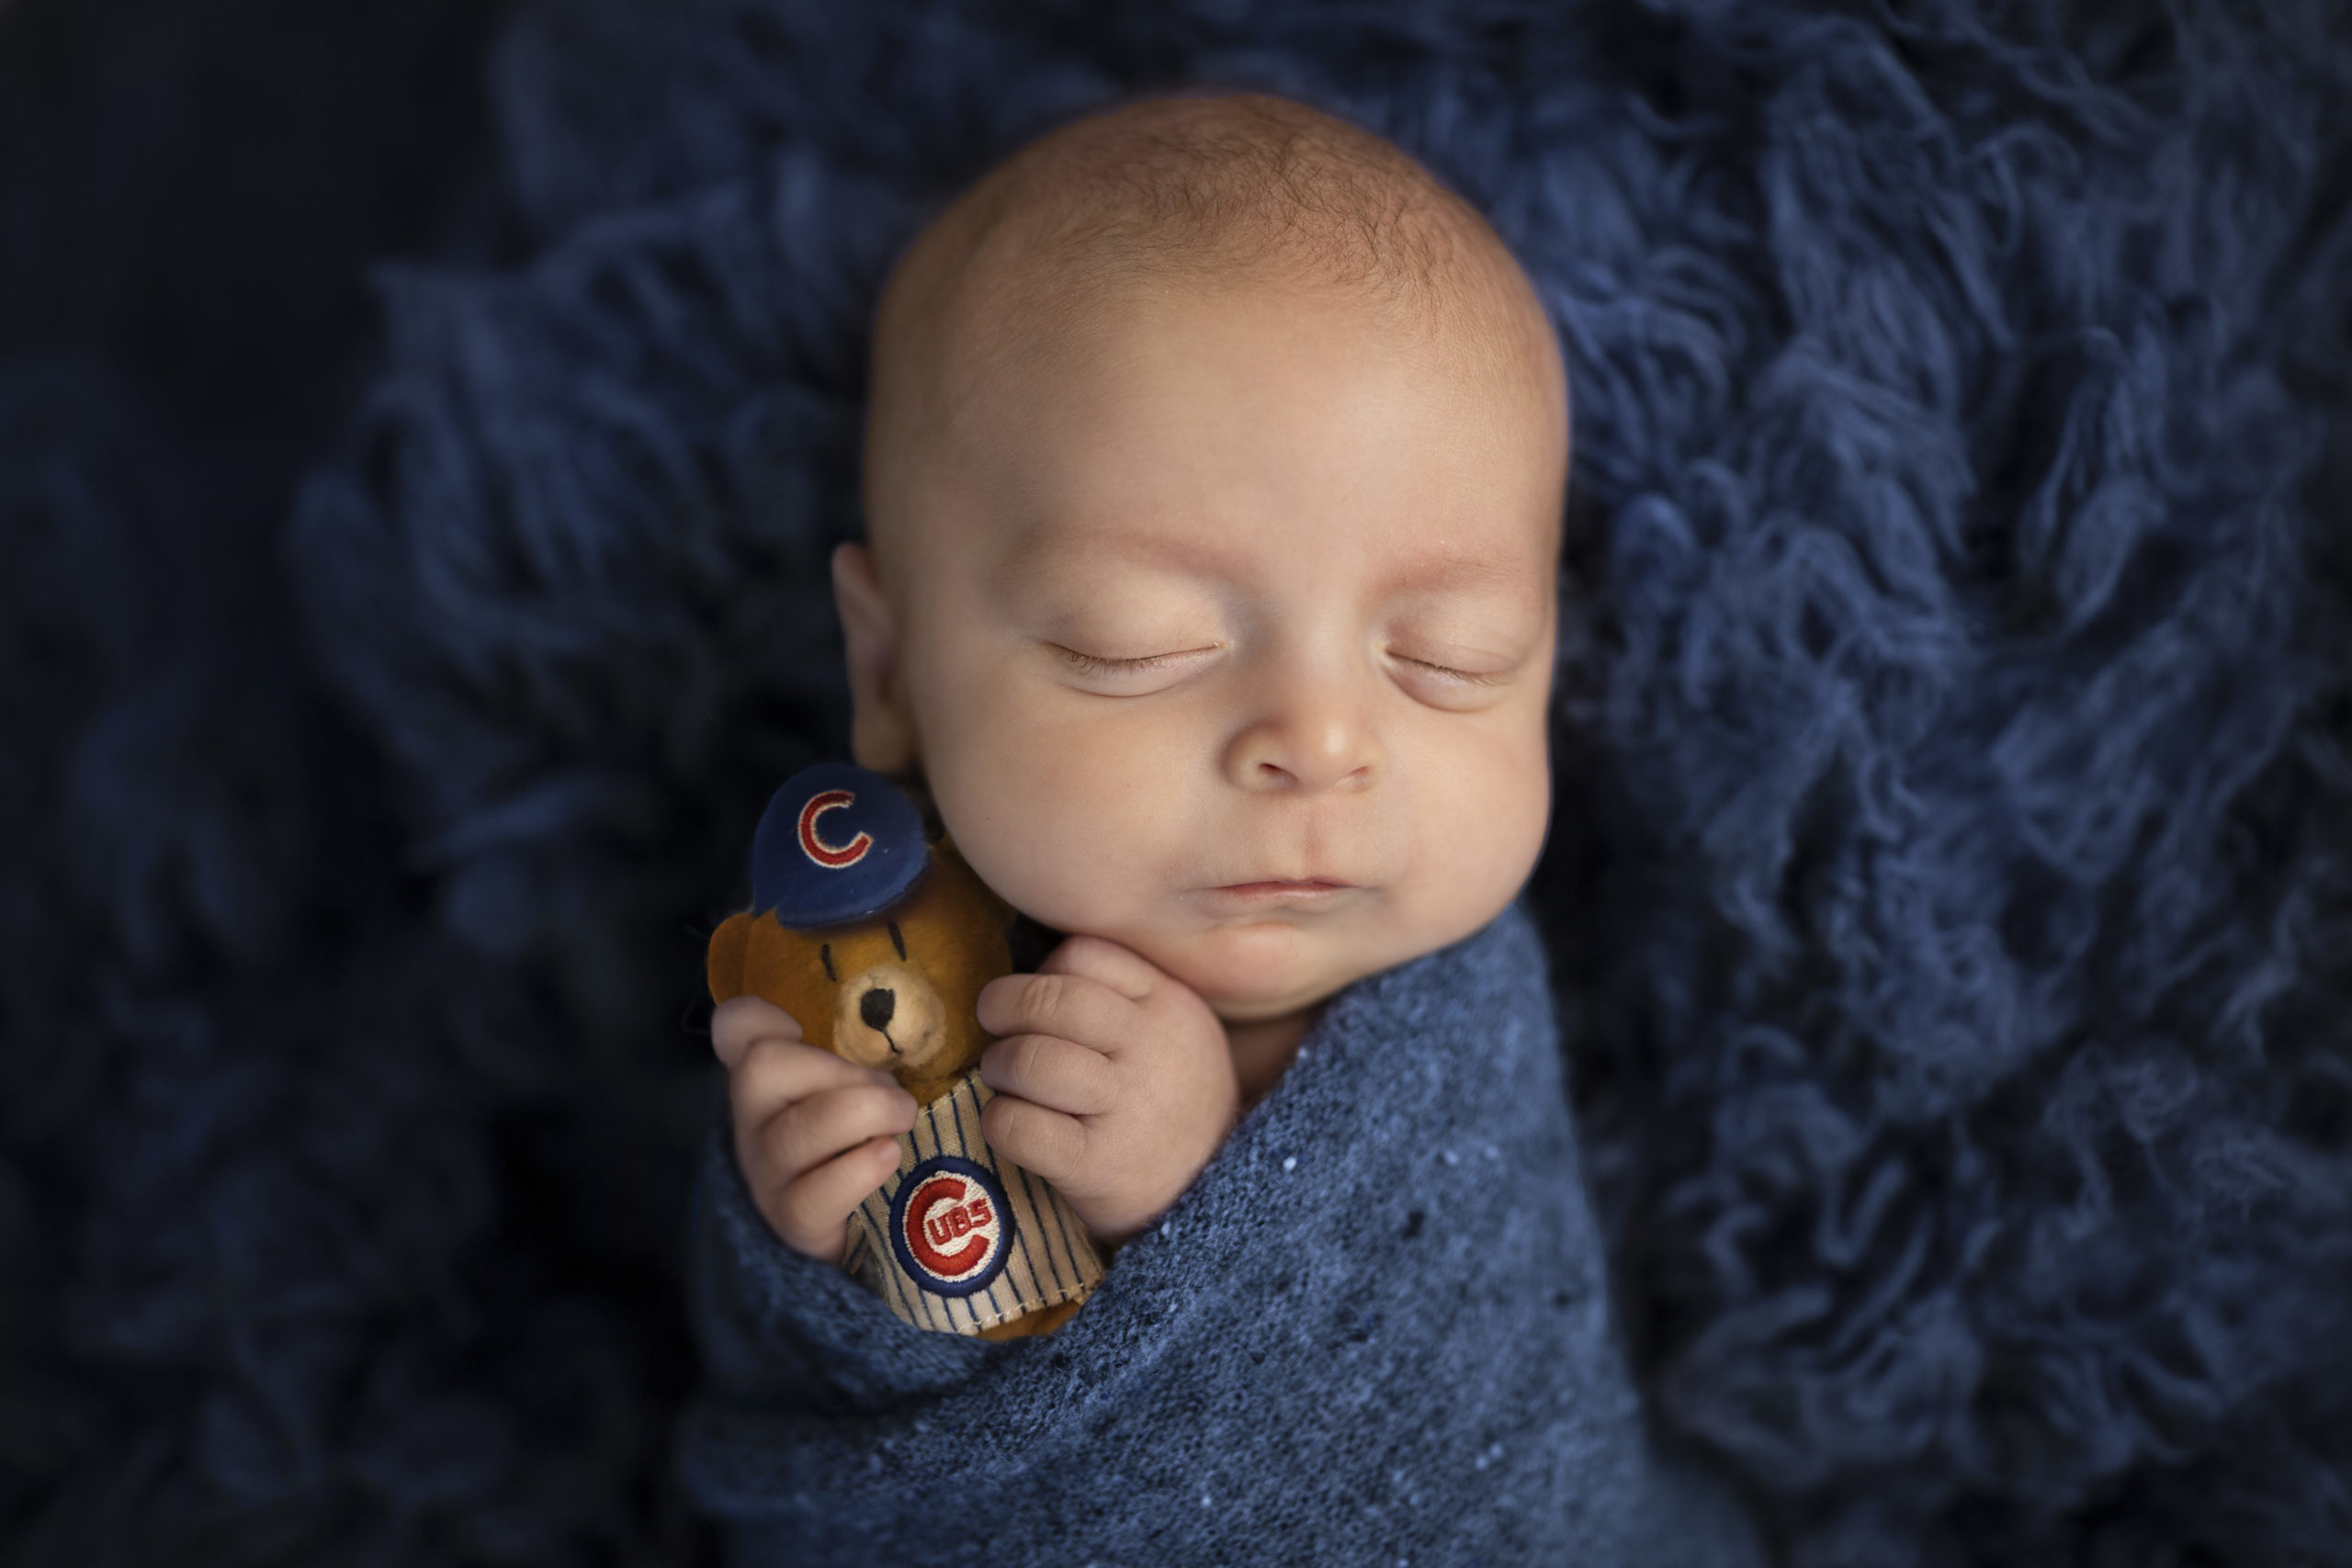 The image shows a newborn baby swaddled holding a Cubs bear. 